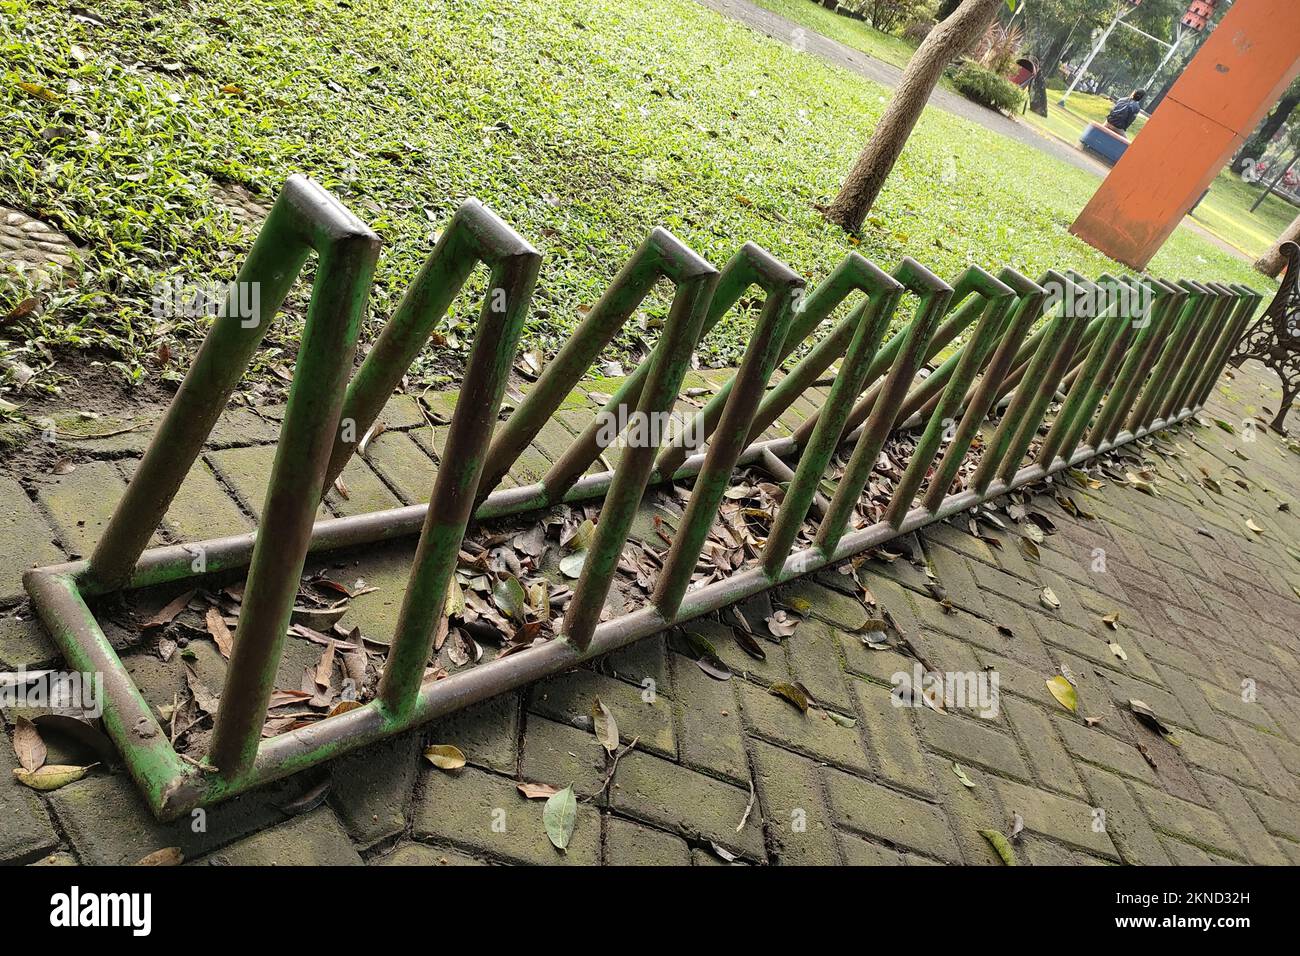 Bicycle parking lot in the park that is placed on a footpath made of paving block Stock Photo